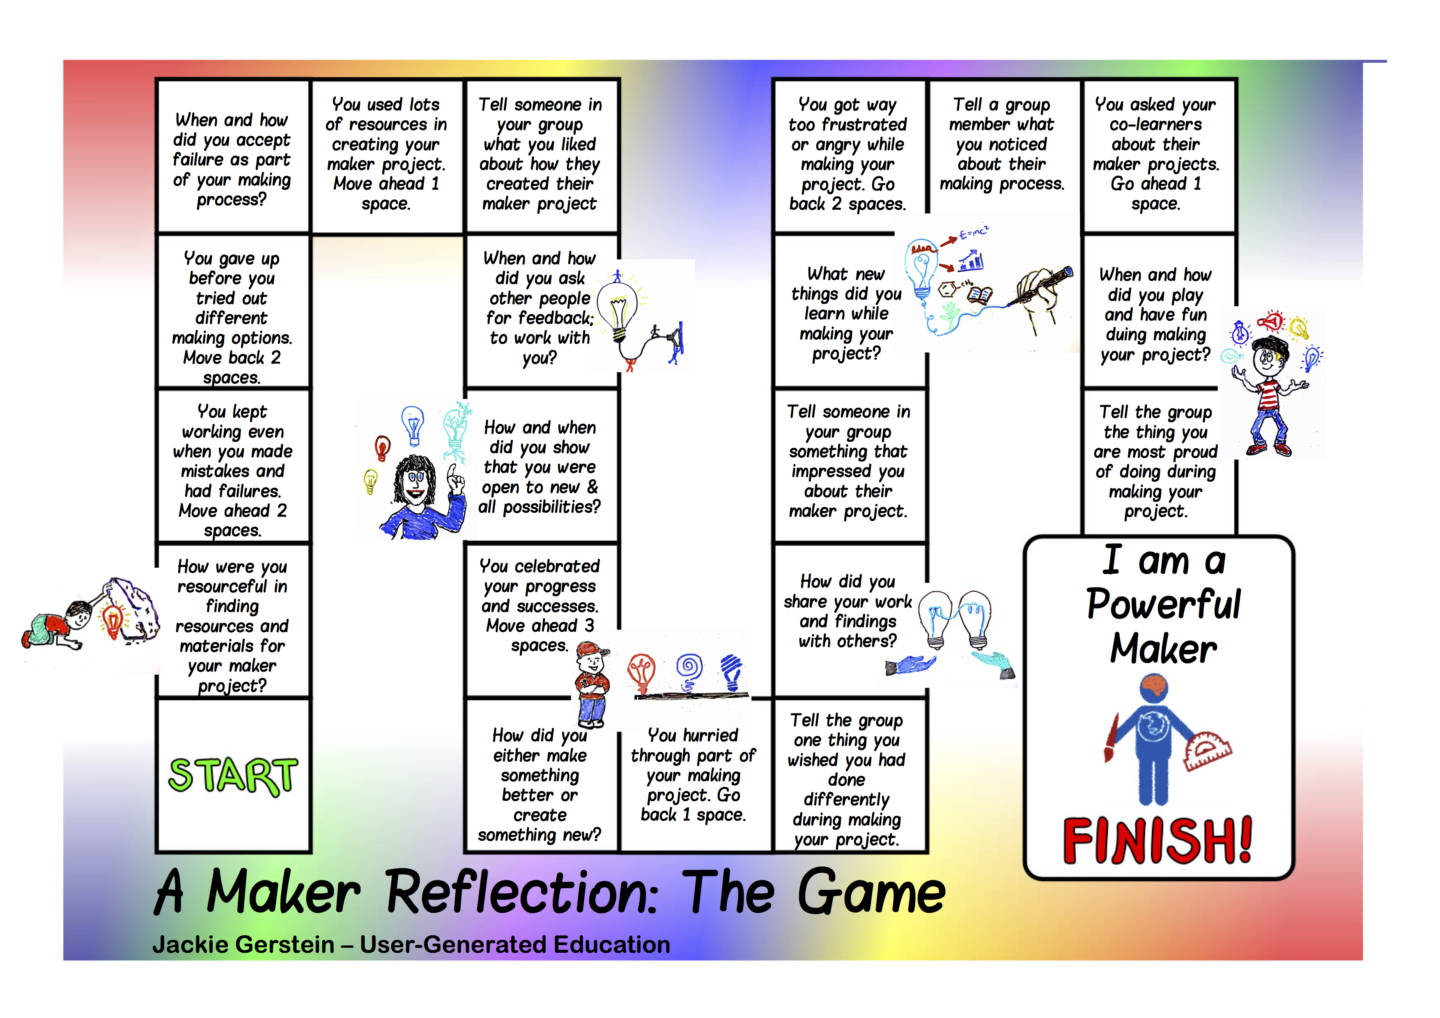 A reflection board game designed to solidify learning after a maker activity.